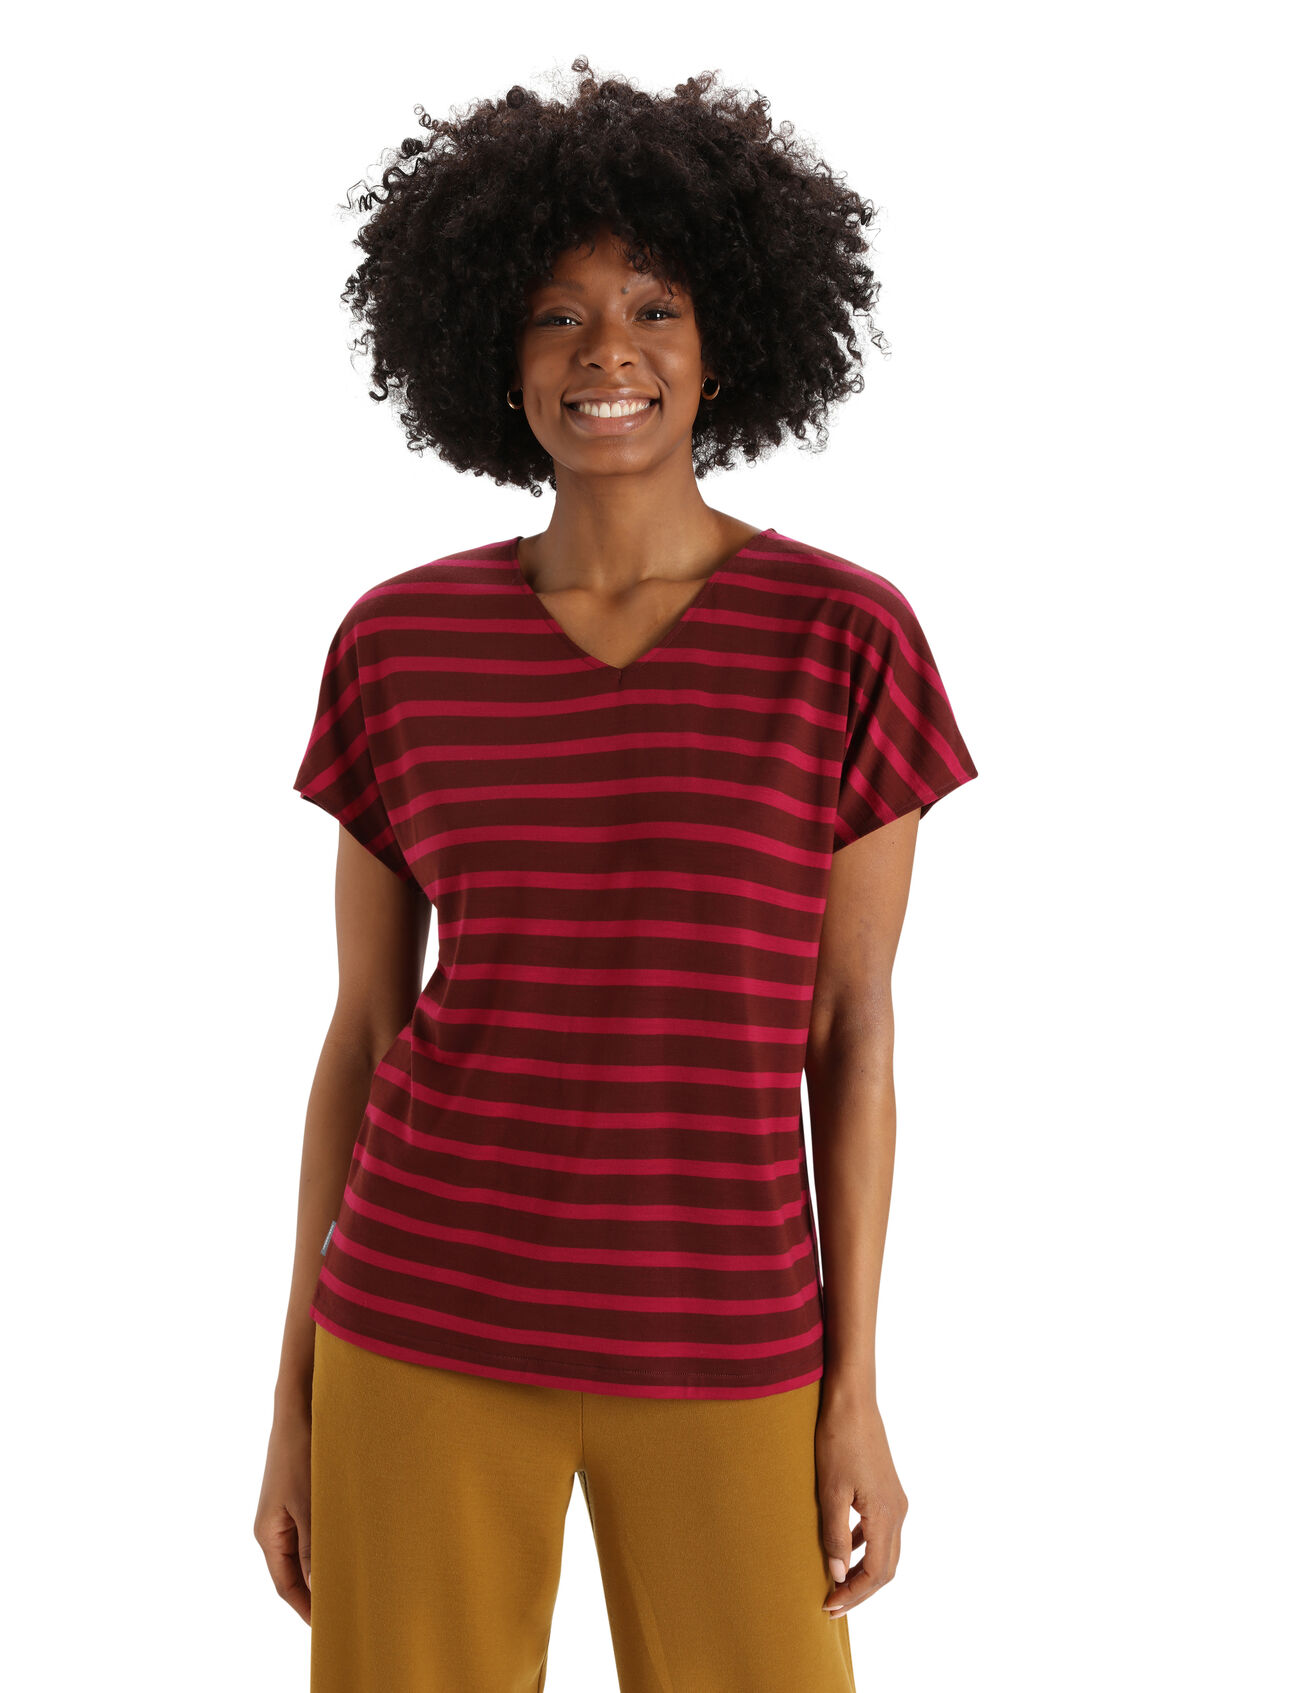 Womens Merino Drayden Reversible Short Sleeve Top Stripe A versatile everyday shirt featuring our Cool-Lite™jersey fabric, the Drayden Reversible Short Sleeve Top Stripe can be worn frontwards for a soft V neck, or backwards for a high crew neck.